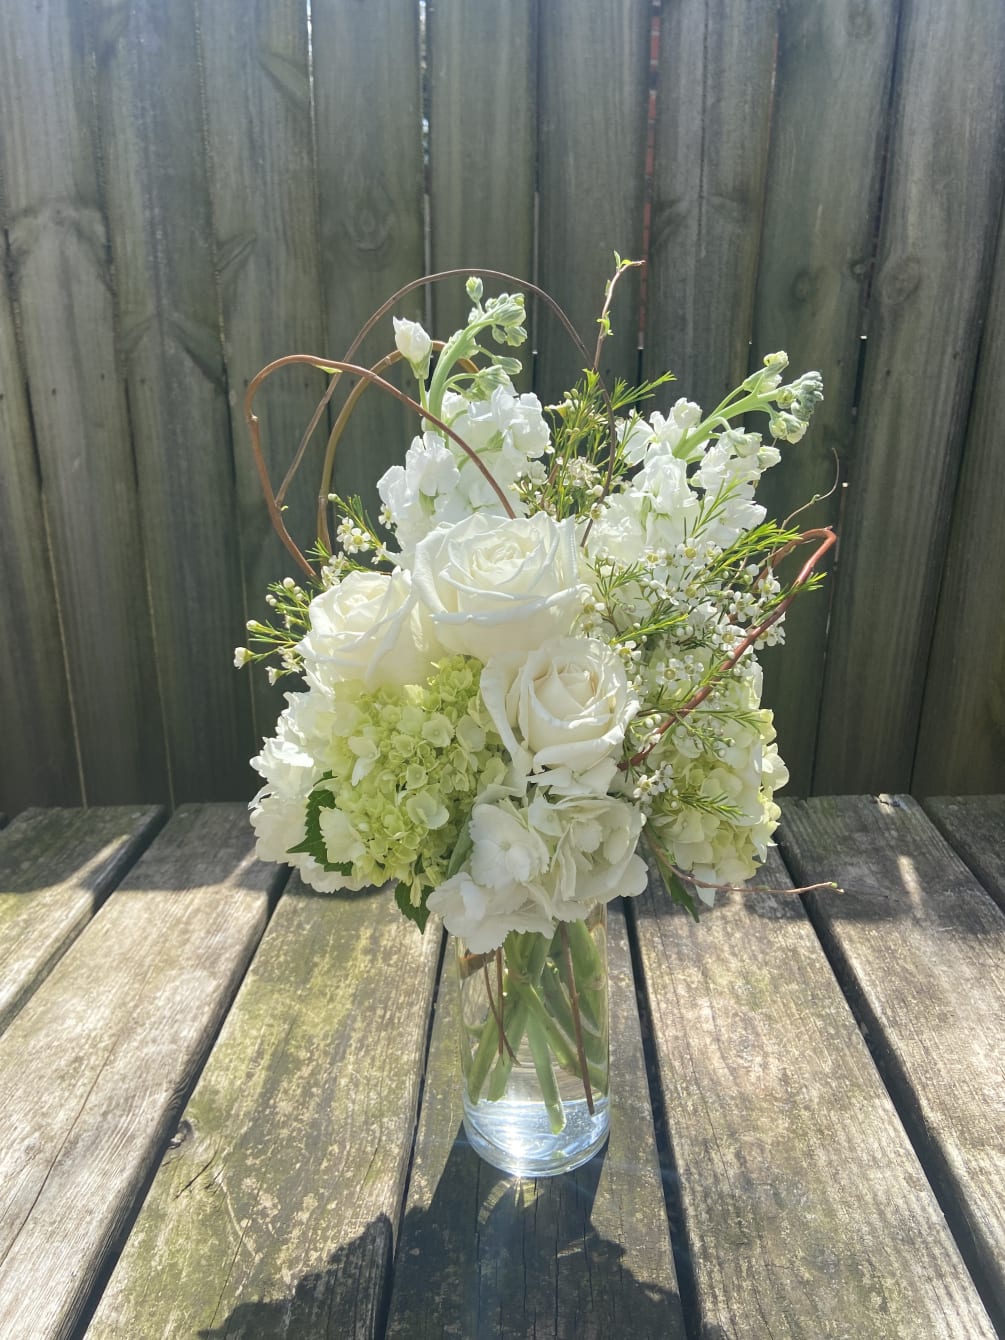 White and green hydrangeas, white roses, accent flowers and curly willow in